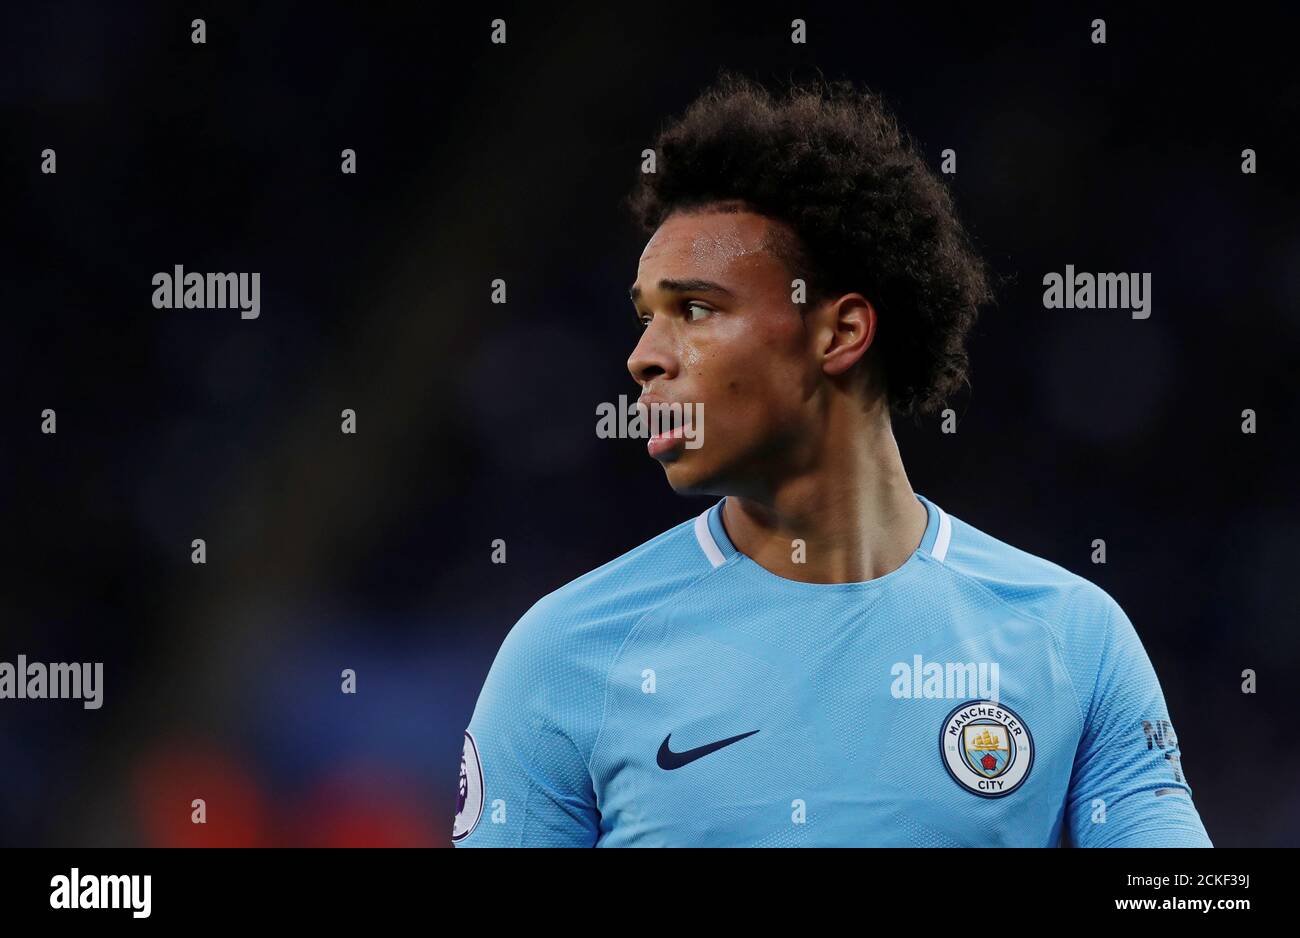 Soccer Football - Premier League - Leicester City vs Manchester City - King Power Stadium, Leicester, Britain - November 18, 2017   Manchester City's Leroy Sane       Action Images via Reuters/Andrew Couldridge    EDITORIAL USE ONLY. No use with unauthorized audio, video, data, fixture lists, club/league logos or 'live' services. Online in-match use limited to 75 images, no video emulation. No use in betting, games or single club/league/player publications. Please contact your account representative for further details. Stock Photo